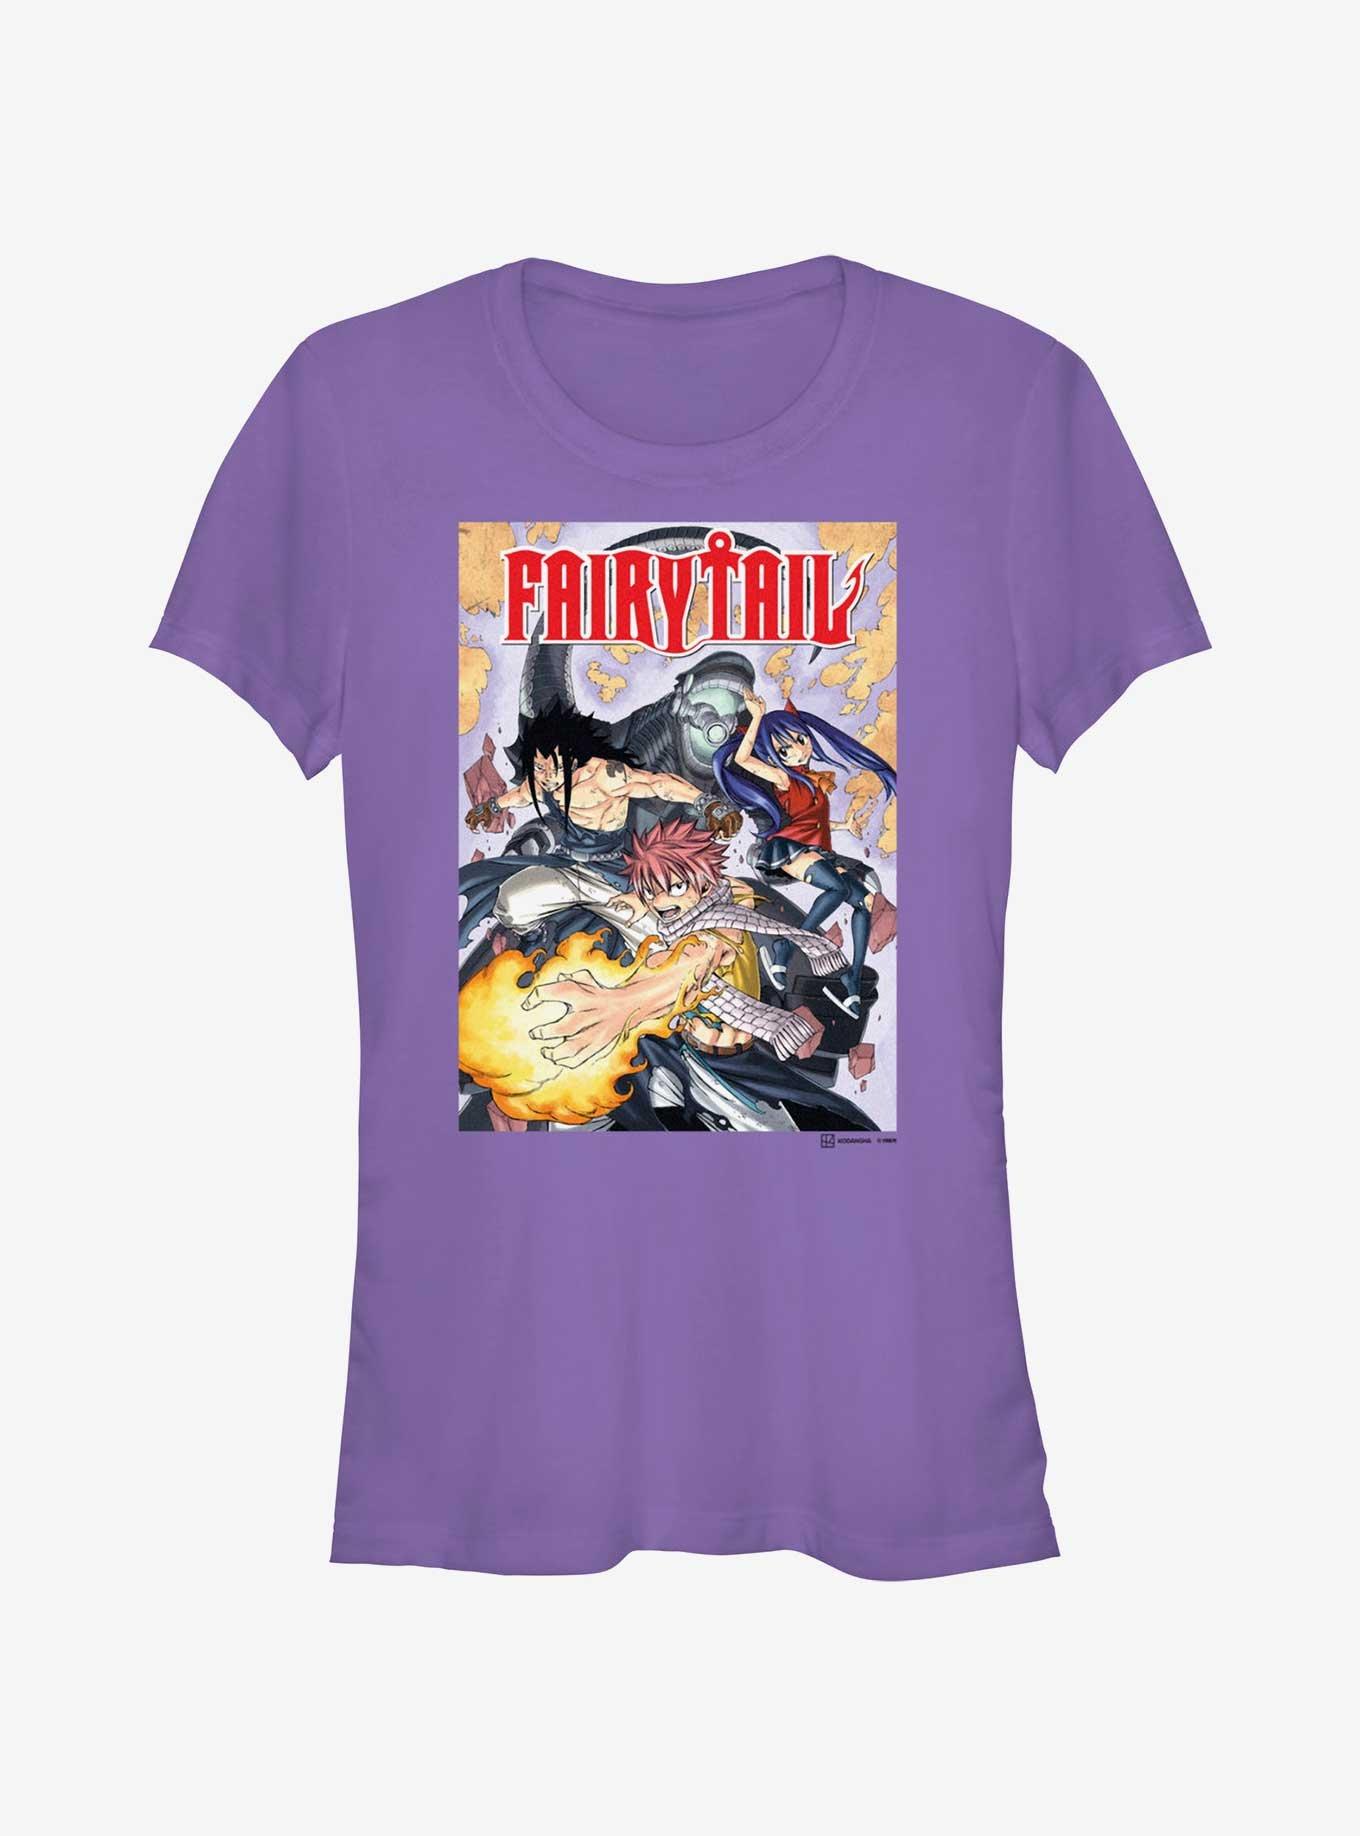 Fairy Tail Cover 2 Girls T-Shirt, PURPLE, hi-res